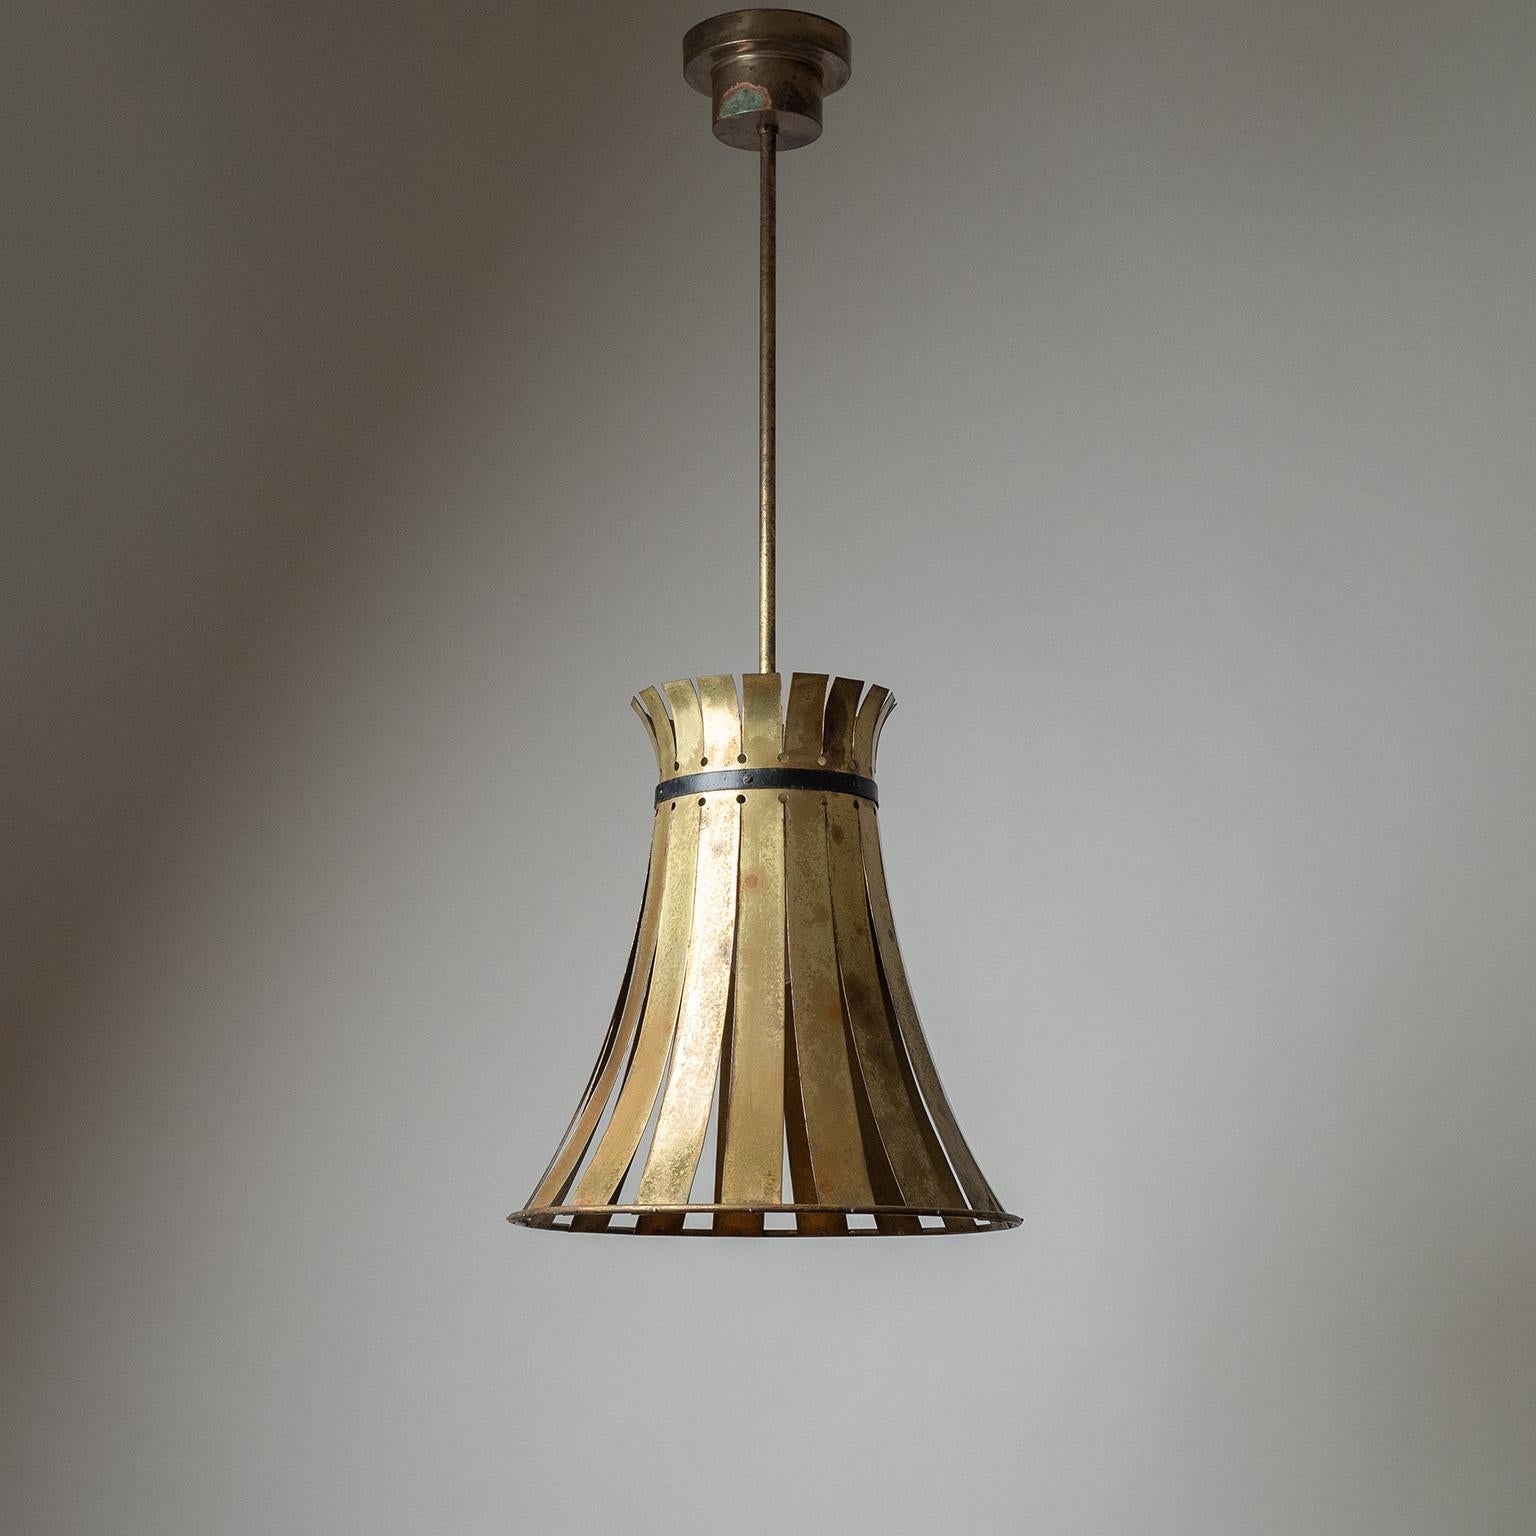 Large brass pendant from the 1940-1950s.The oversized cone-shaped body is made from a single polished sheet of brass, cut into strips that are attached to a brass ring on the bottom. Heavy patina throughout with a single original brass E27 socket